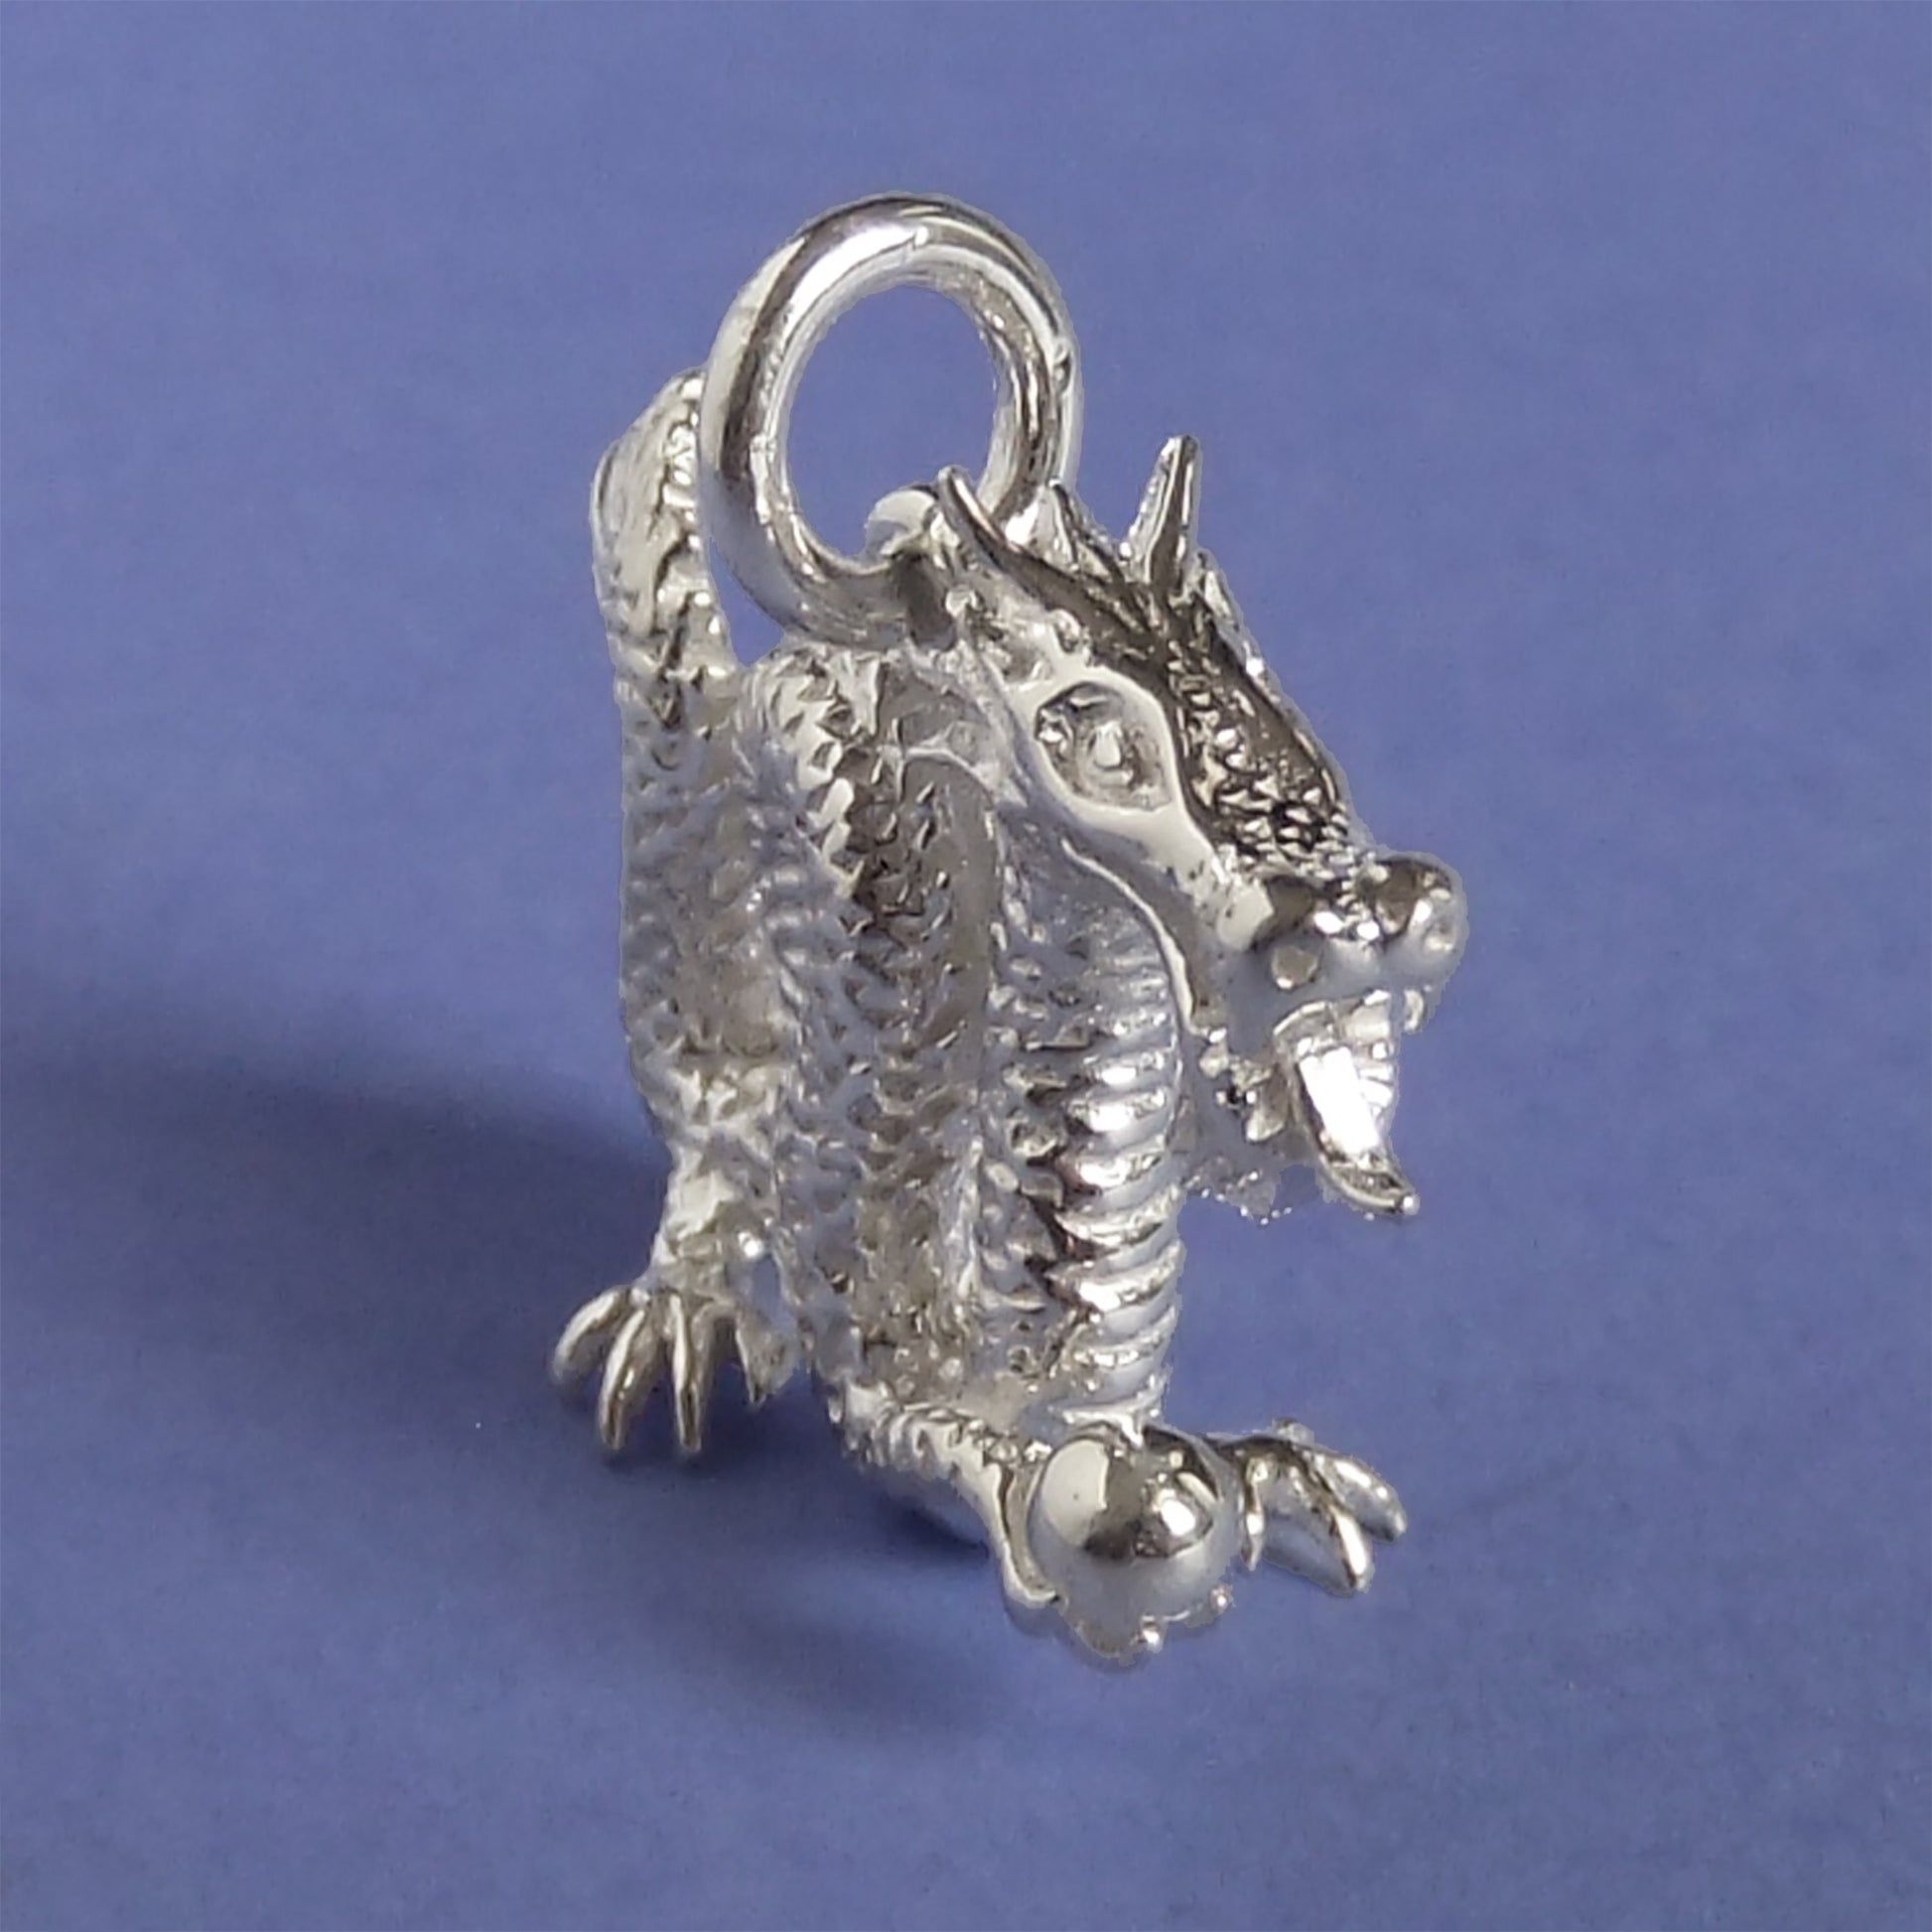 Dragon Charms Pendant (4pcs / 14mm x 20mm / Tibetan Silver / 2 Sided) Gothic Jewellery Legendary Creature Medieval Knight Fantasy CHM1171